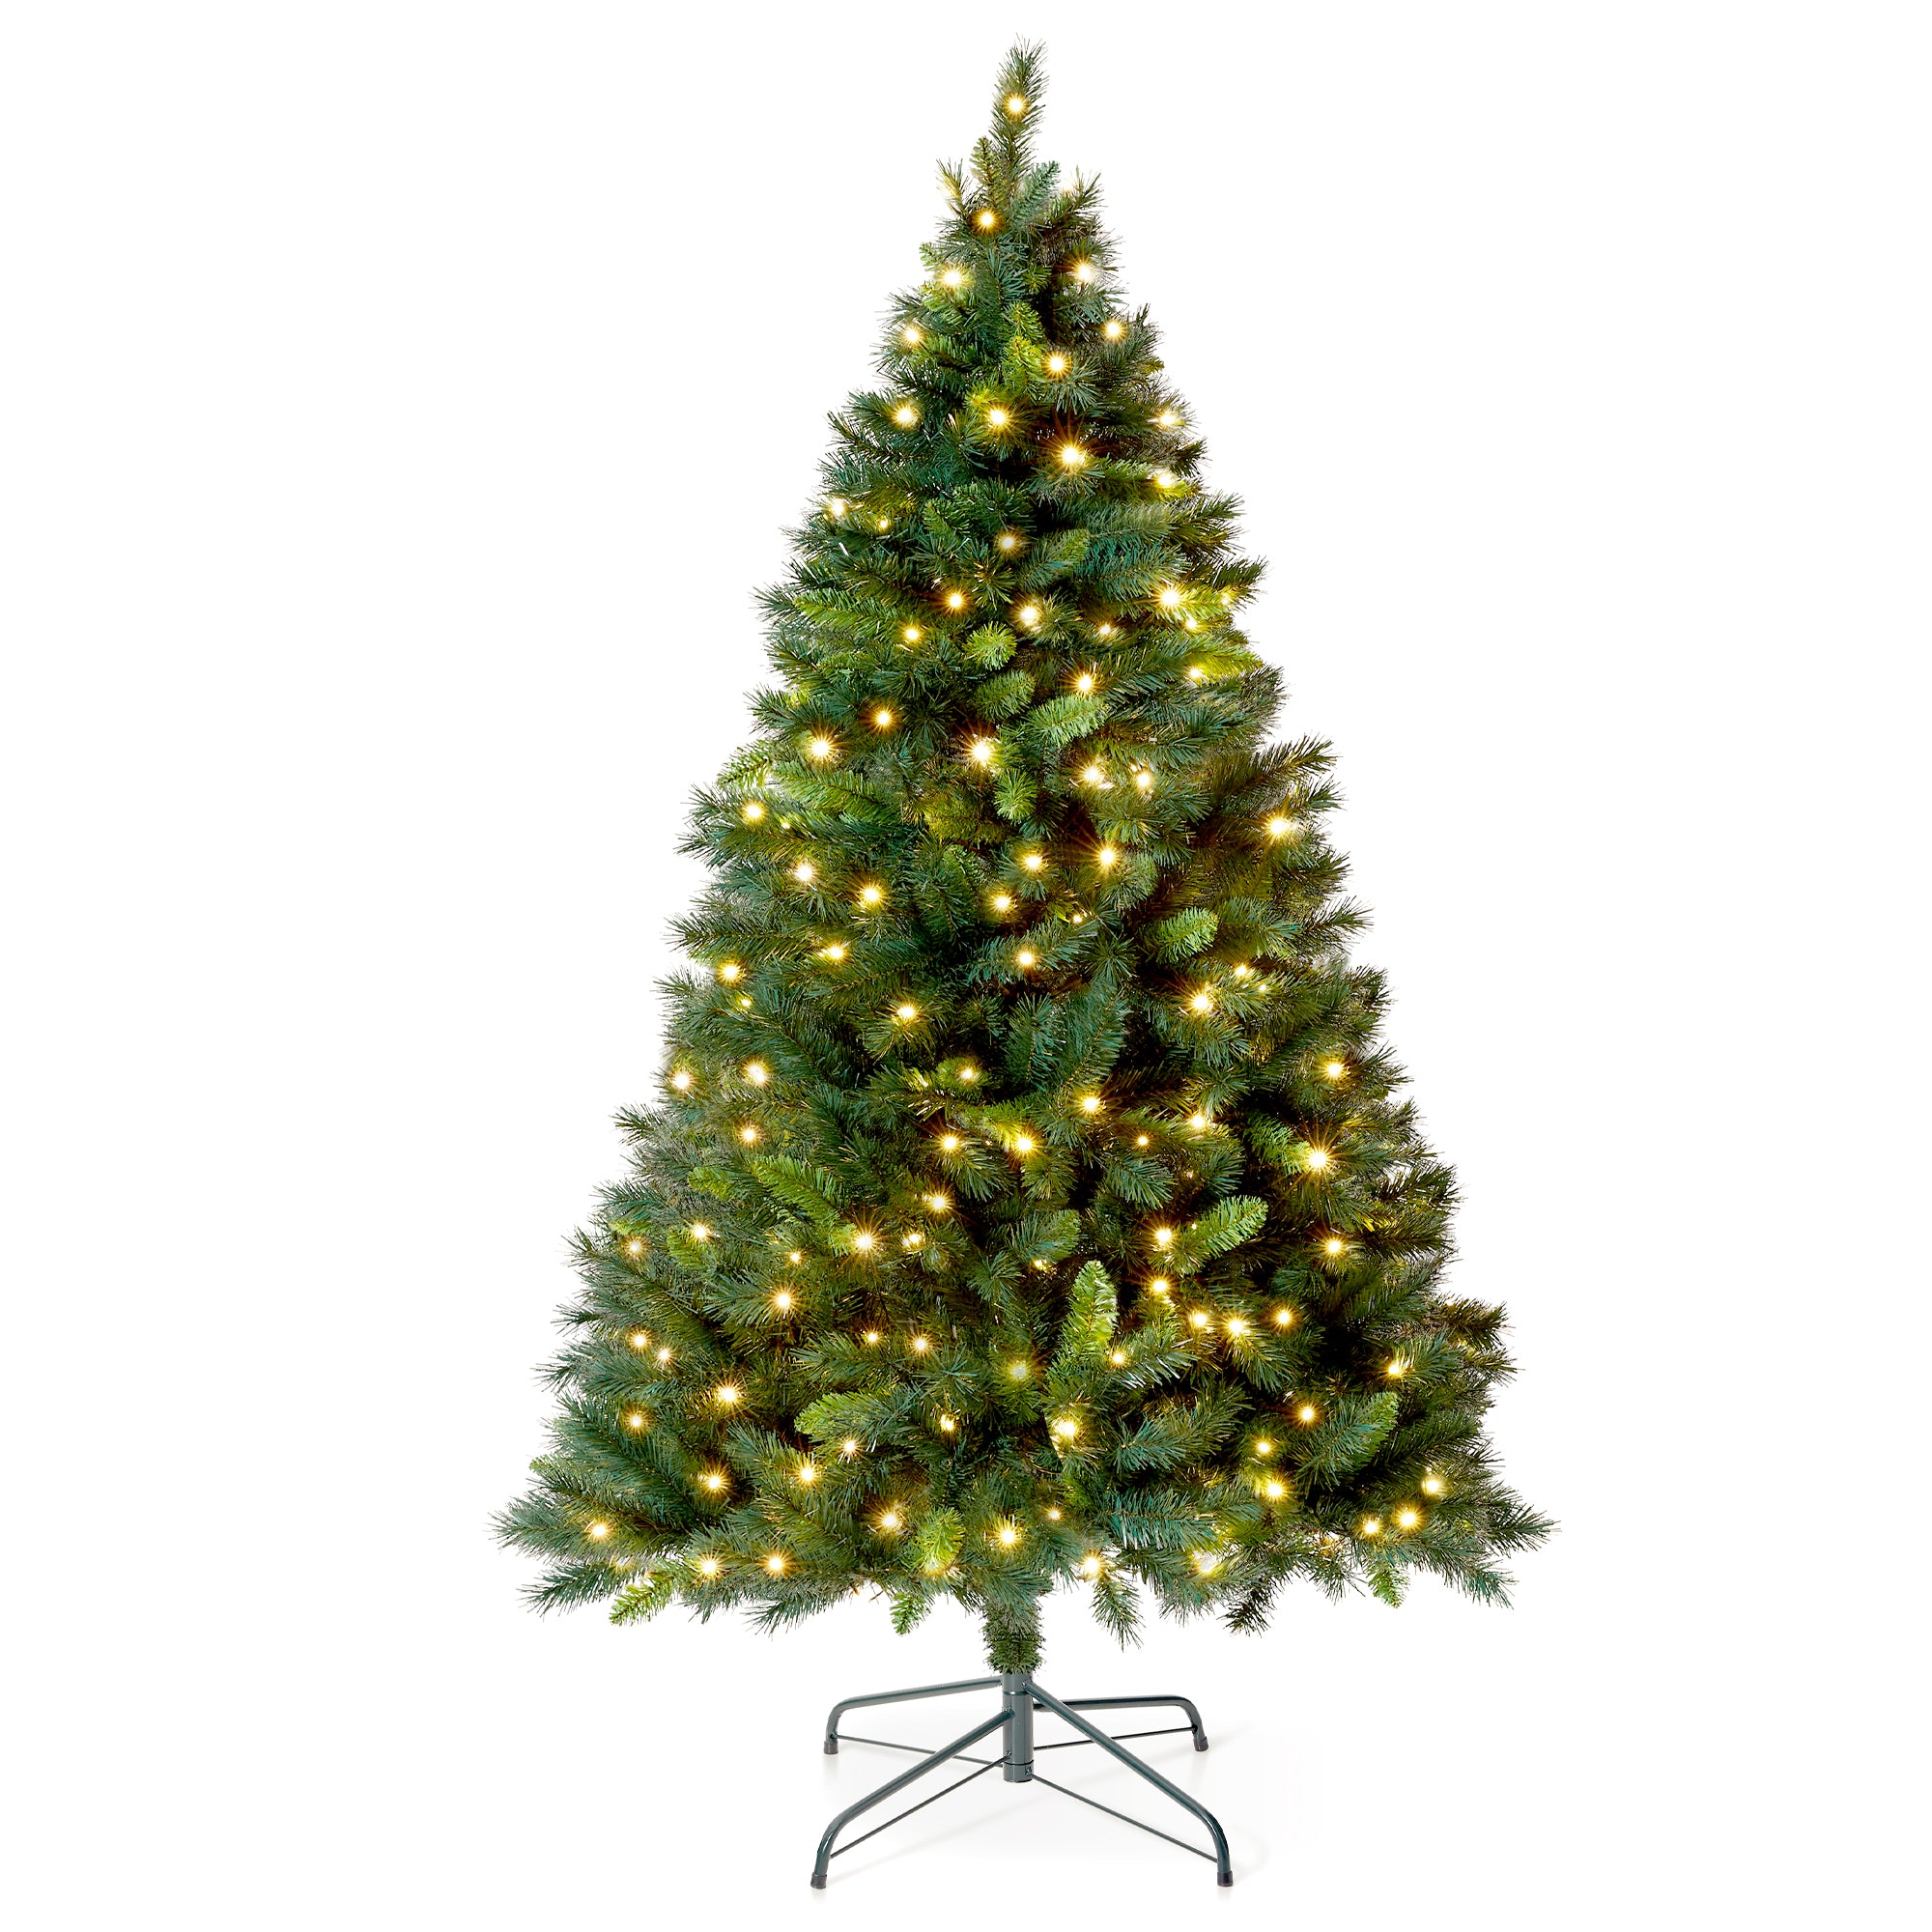 VeryMerry 5FT 'Snowhill' Pre Lit Christmas Tree with 200 Built-In Warm White LED Lights with Auto-Off Timer, 8 Lighting Modes and Foldable Metal Stand